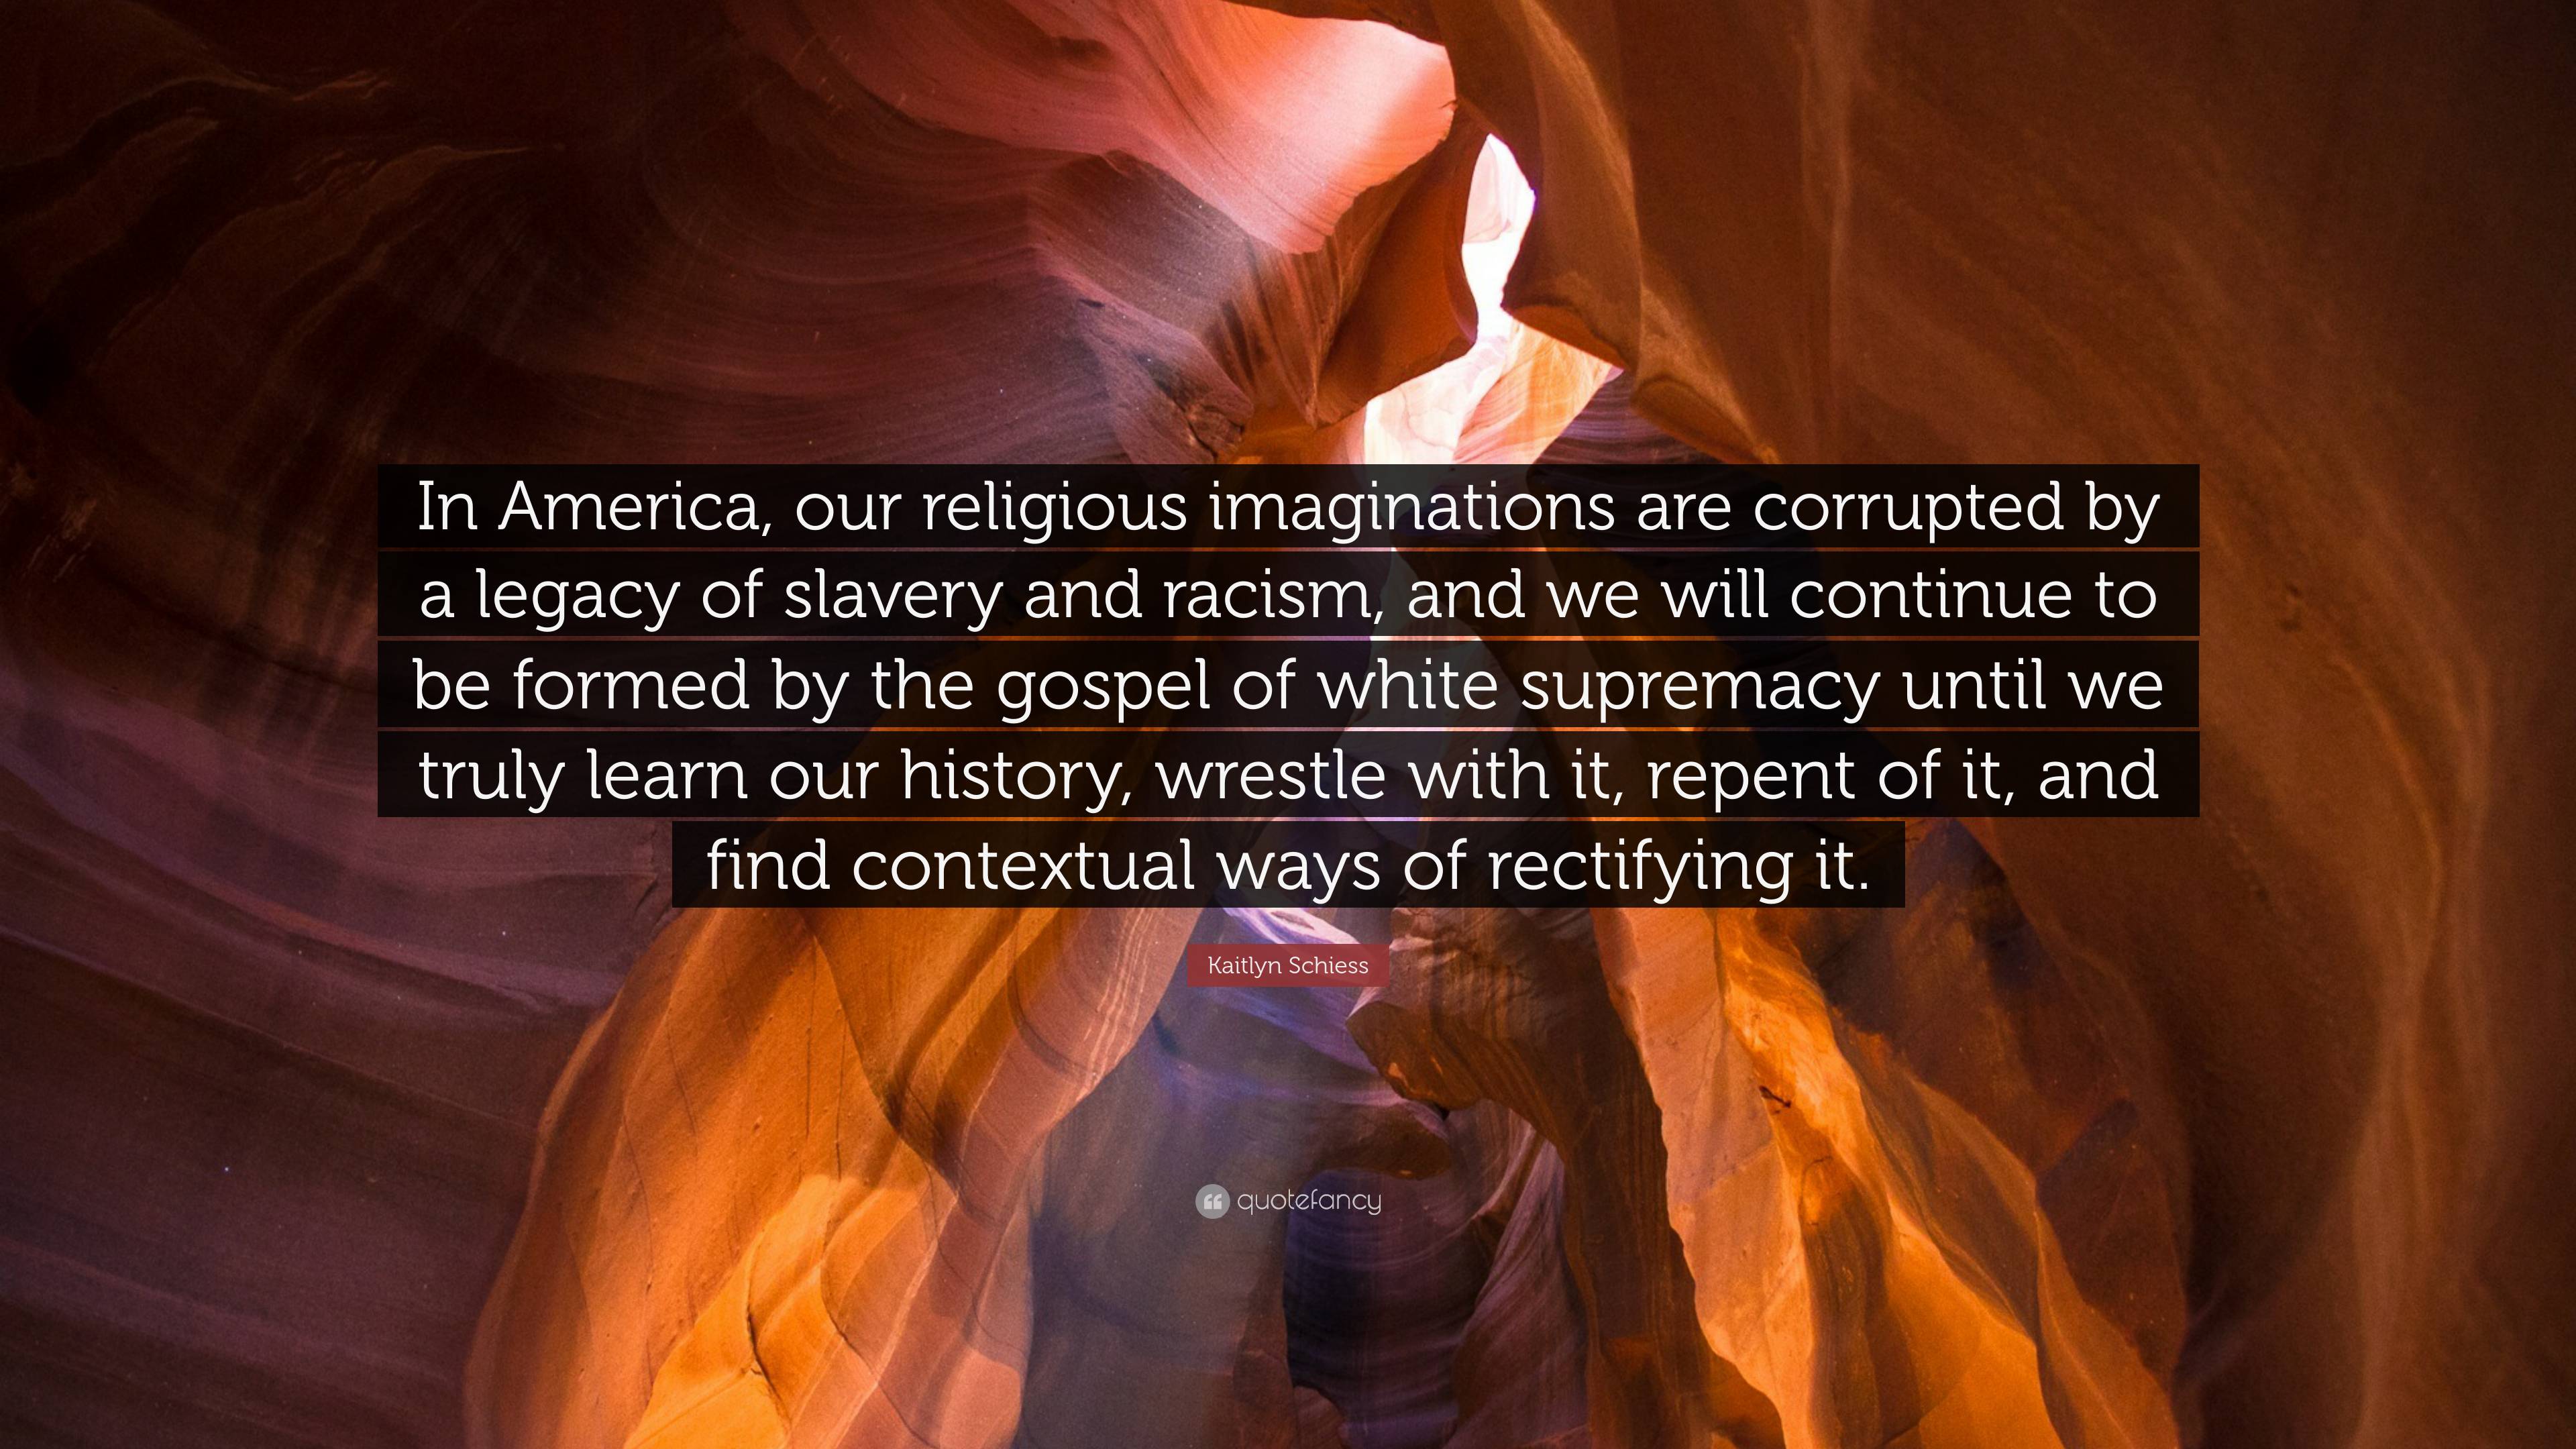 Kaitlyn Schiess Quote: “In America, our religious imaginations are  corrupted by a legacy of slavery and racism, and we will continue to be  forme”